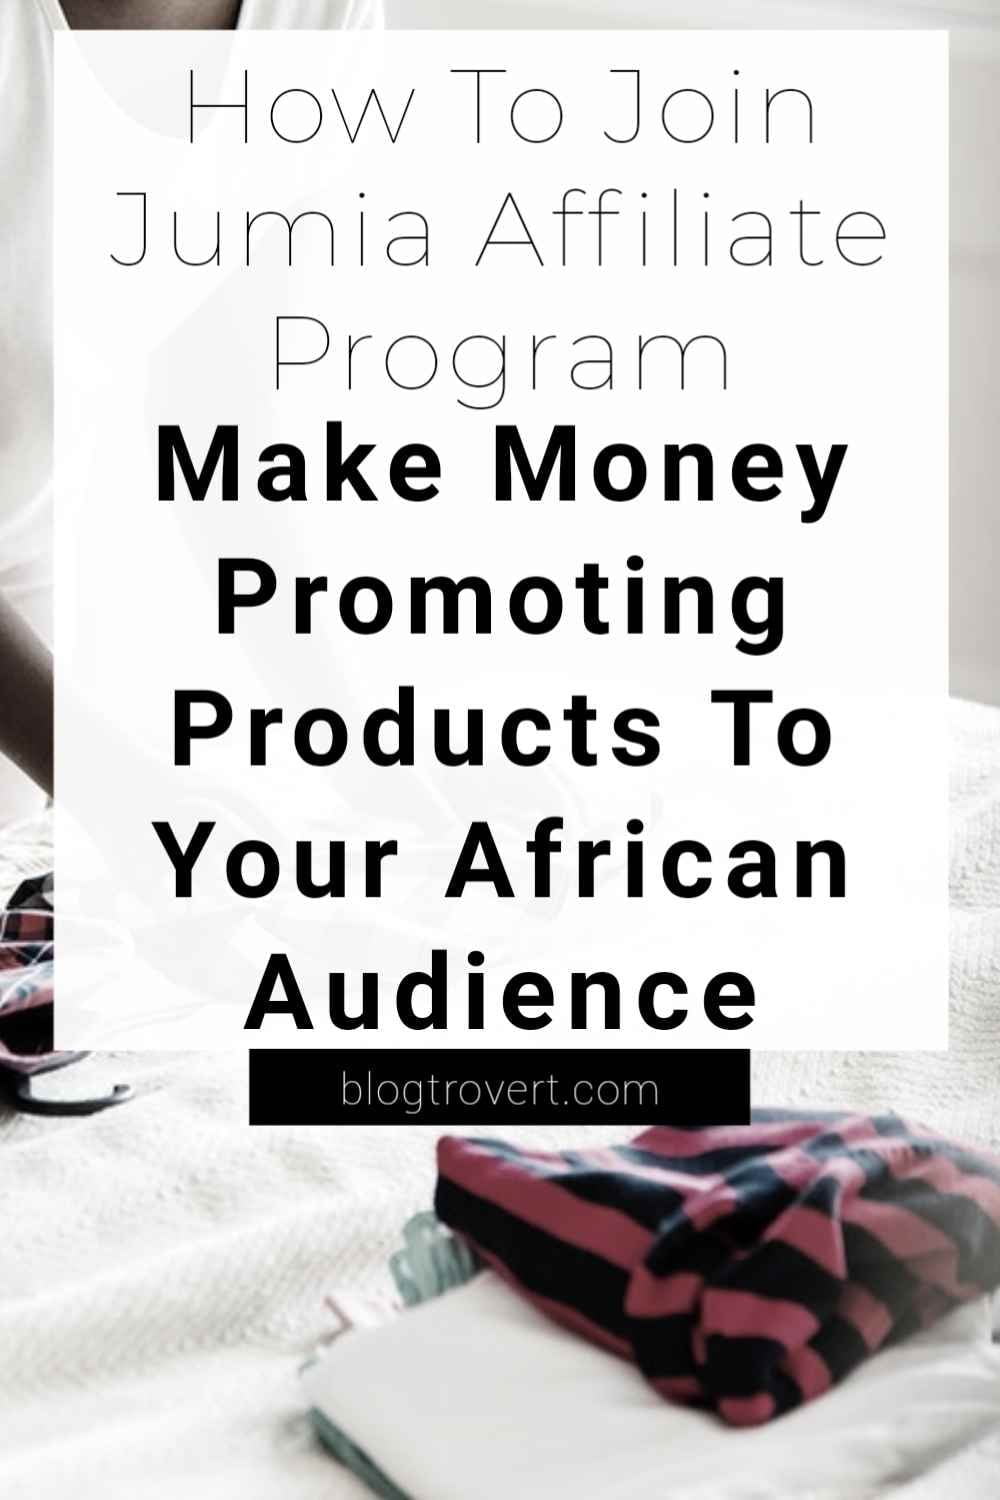 How to make money with Jumia affiliate program - the ultimate guide 2